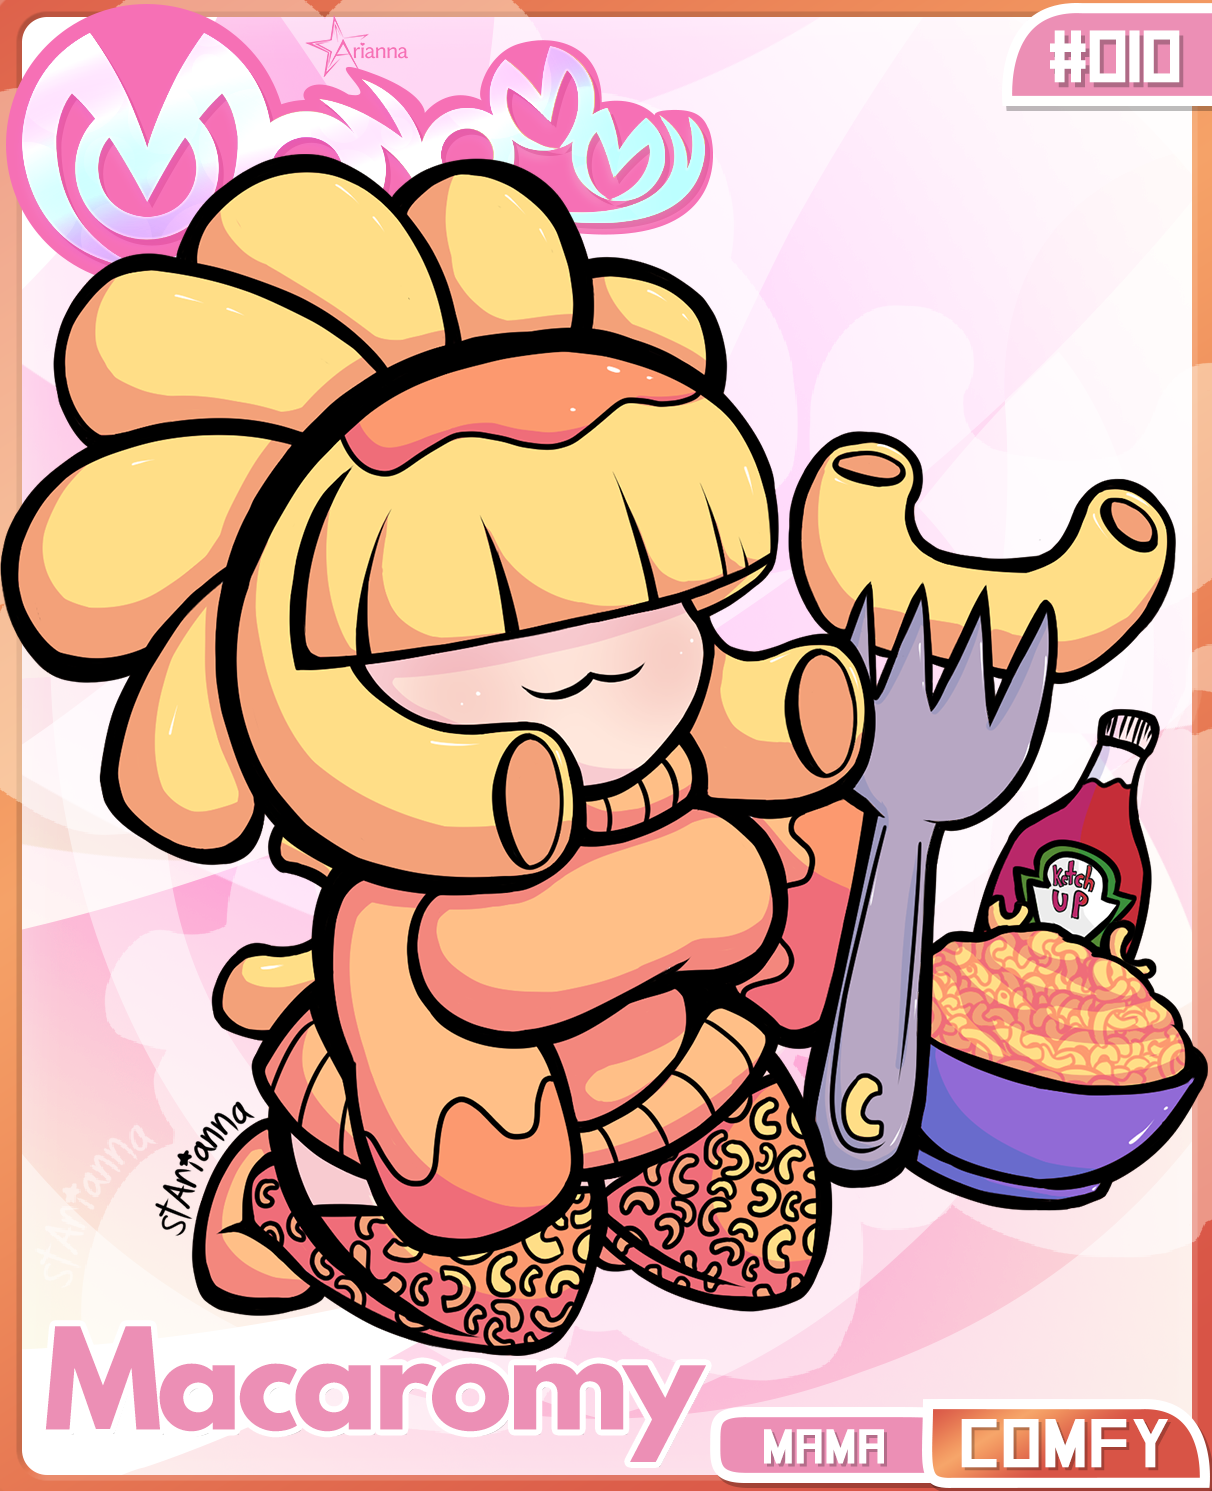 Macaromy, Monommy #010, a mama class comfy-type